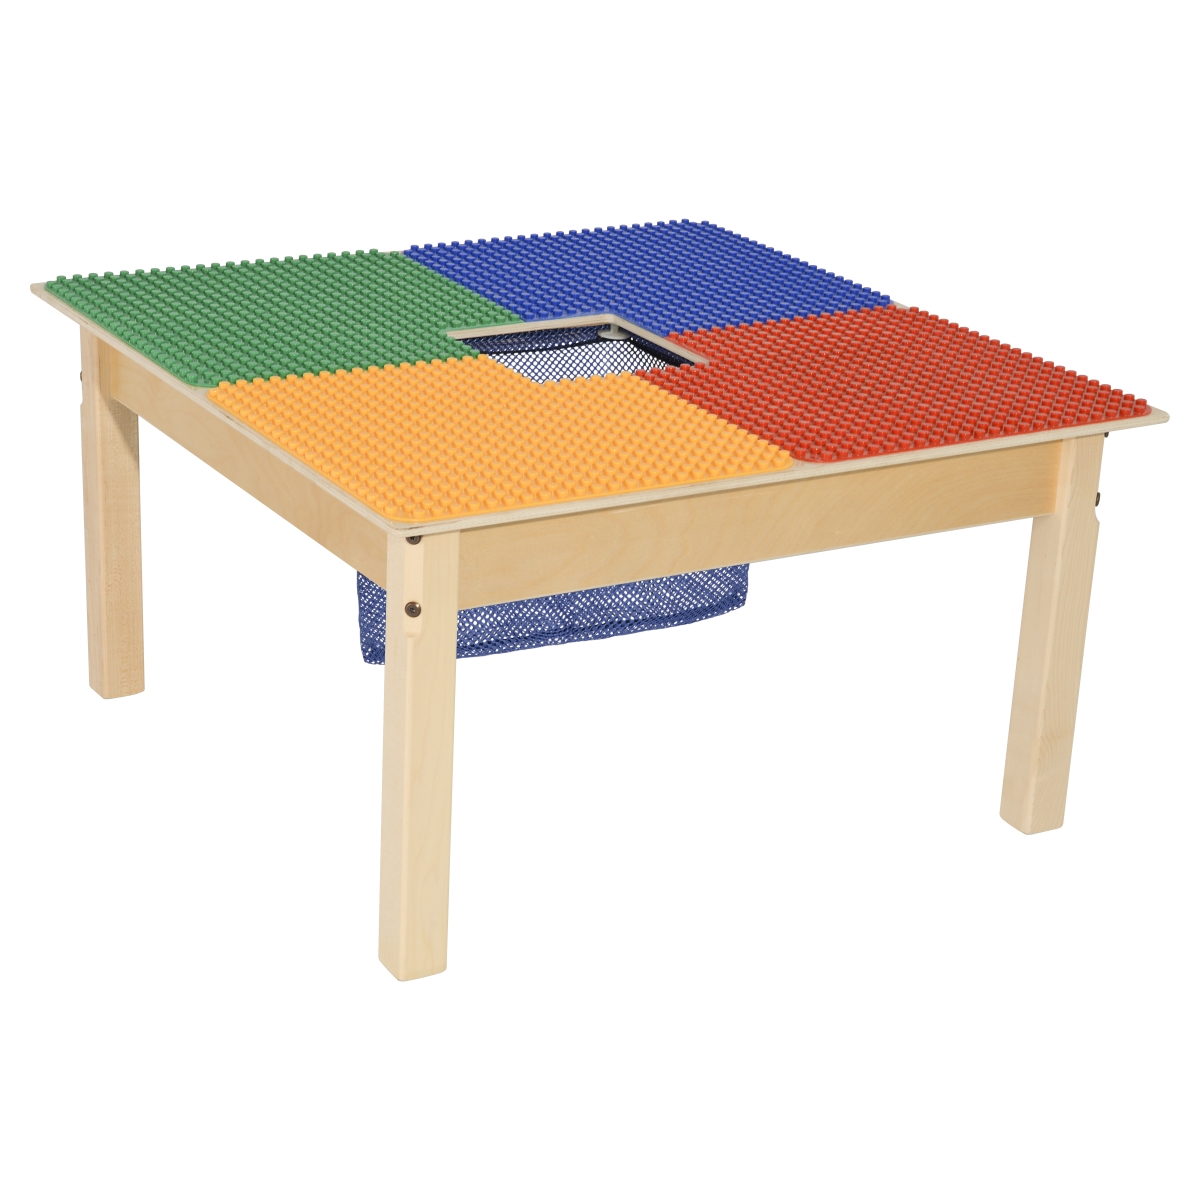 Tp3131pgn20 20 In. Duplo Compatible Square Table With Legs, Multi Color